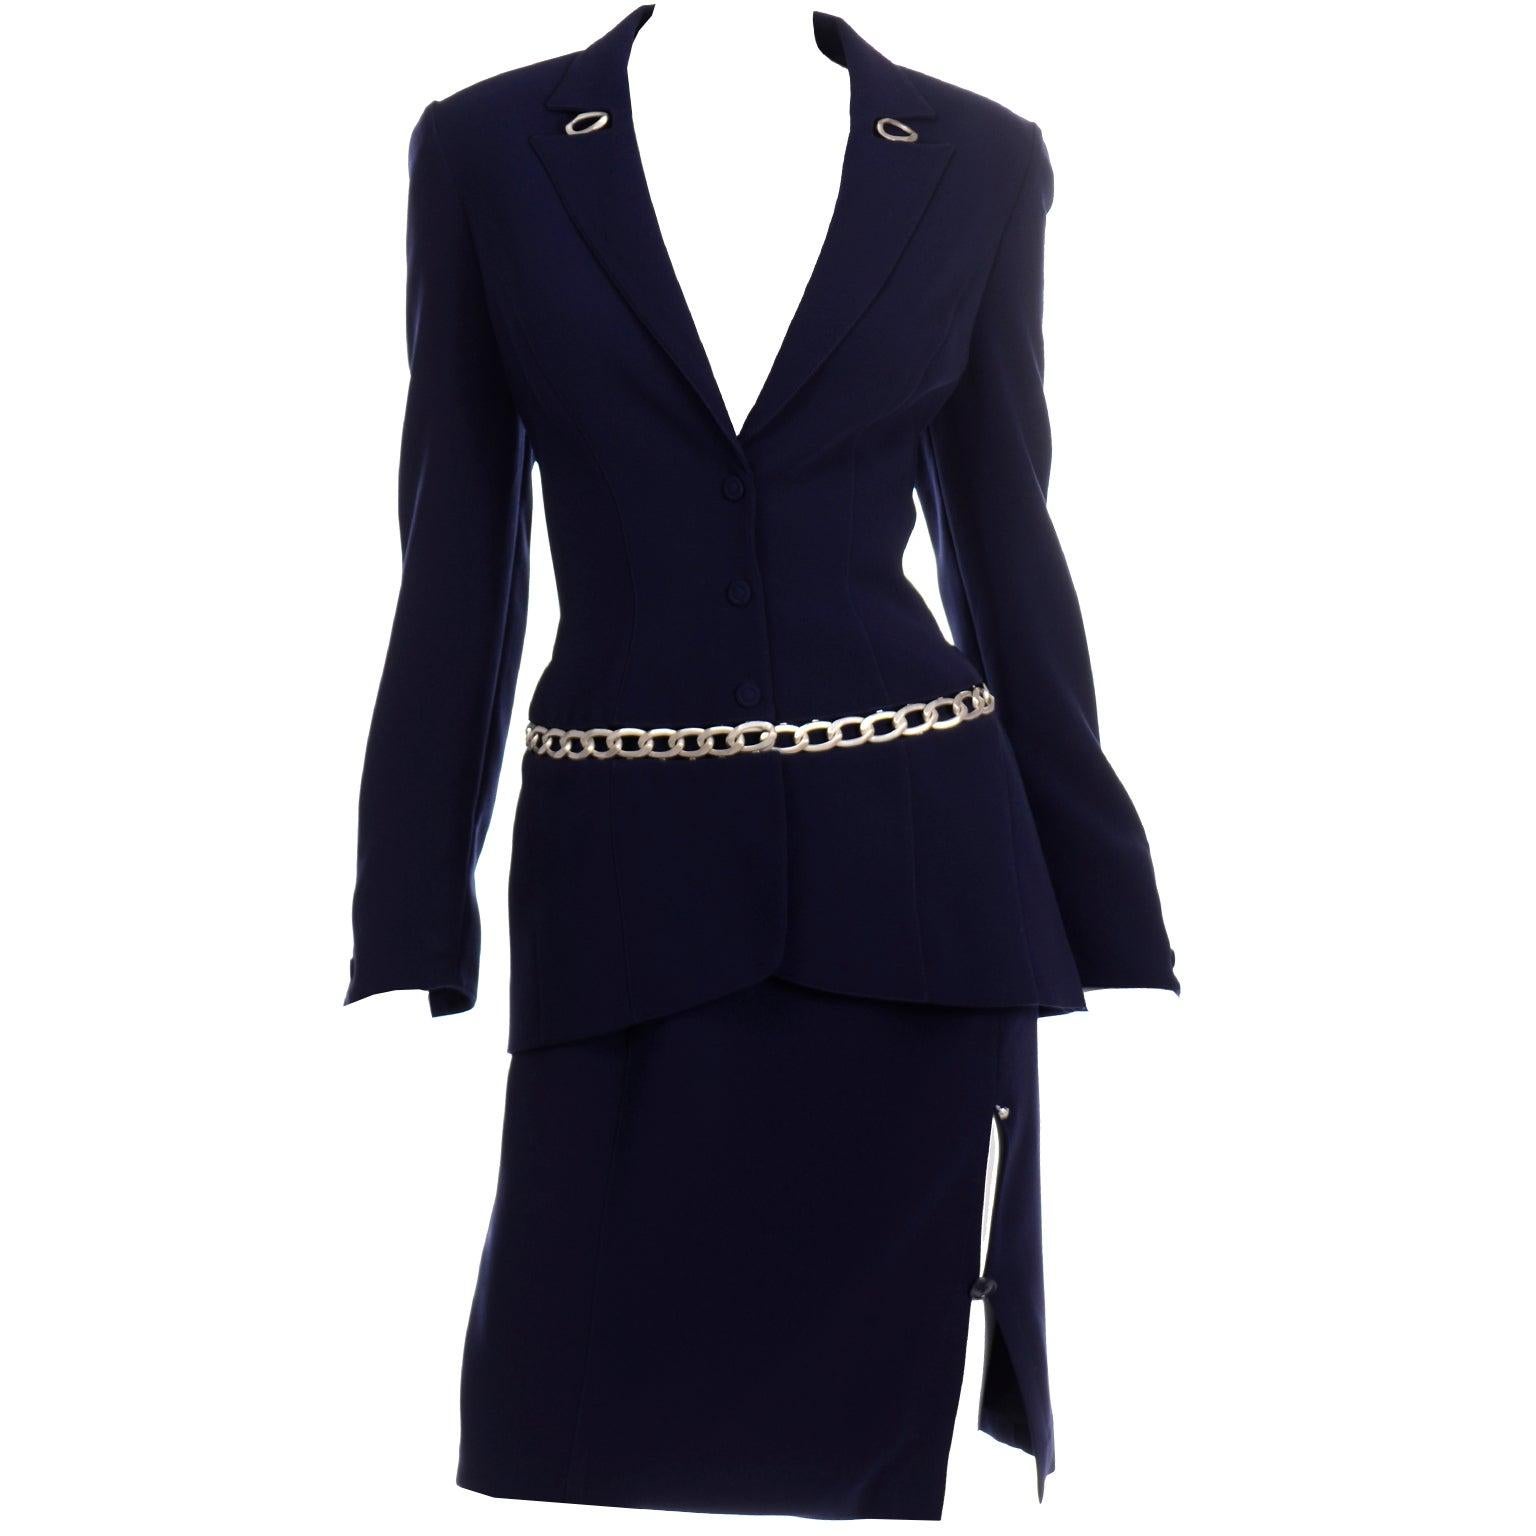 Thierry Mugler Vintage Navy Blue Skirt & Jacket Suit With Chain Detail